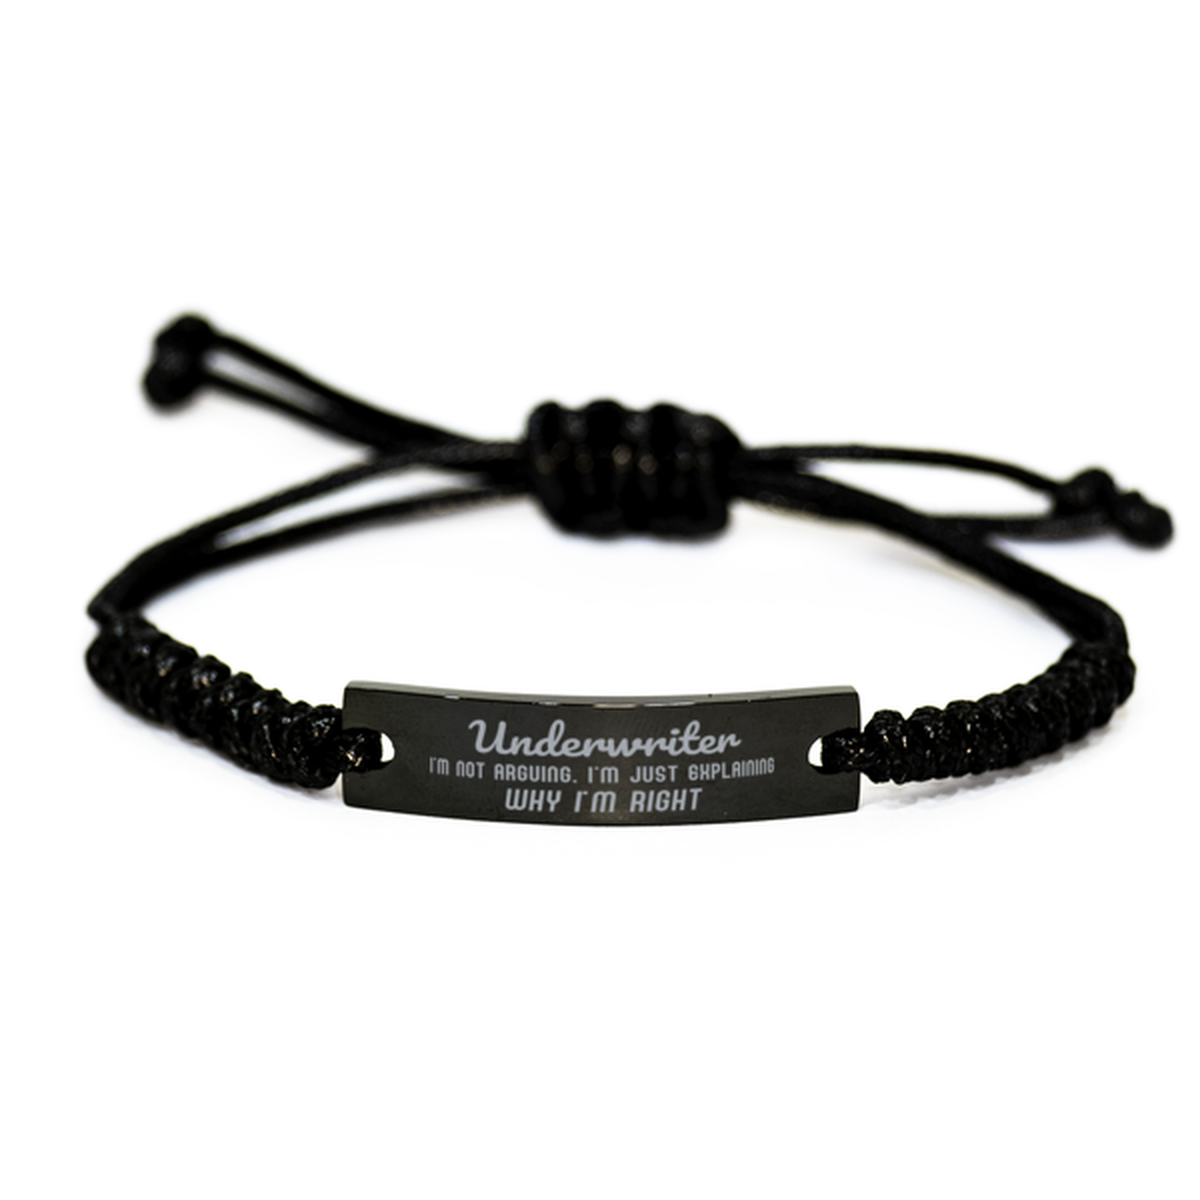 Underwriter I'm not Arguing. I'm Just Explaining Why I'm RIGHT Black Rope Bracelet, Funny Saying Quote Underwriter Gifts For Underwriter Graduation Birthday Christmas Gifts for Men Women Coworker